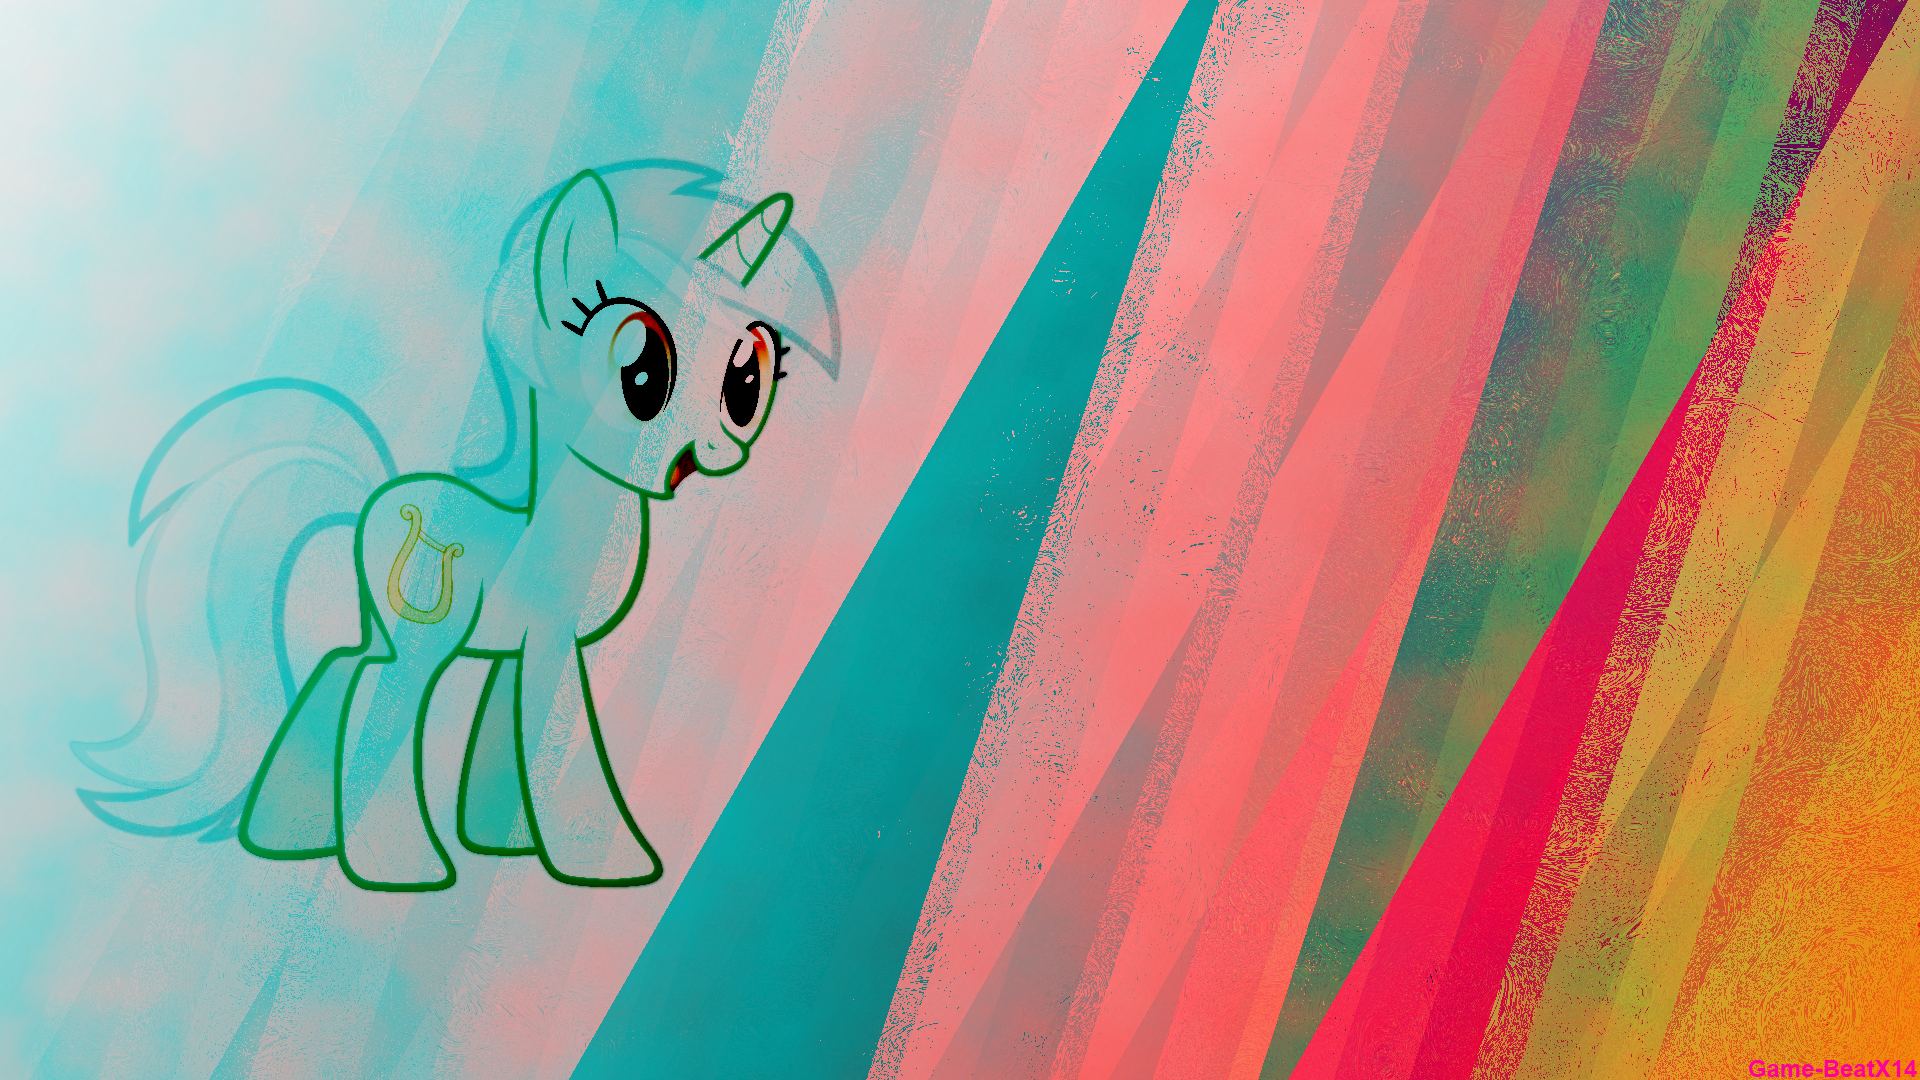 Lyra Wallpaper by cryocubed and Game-BeatX14